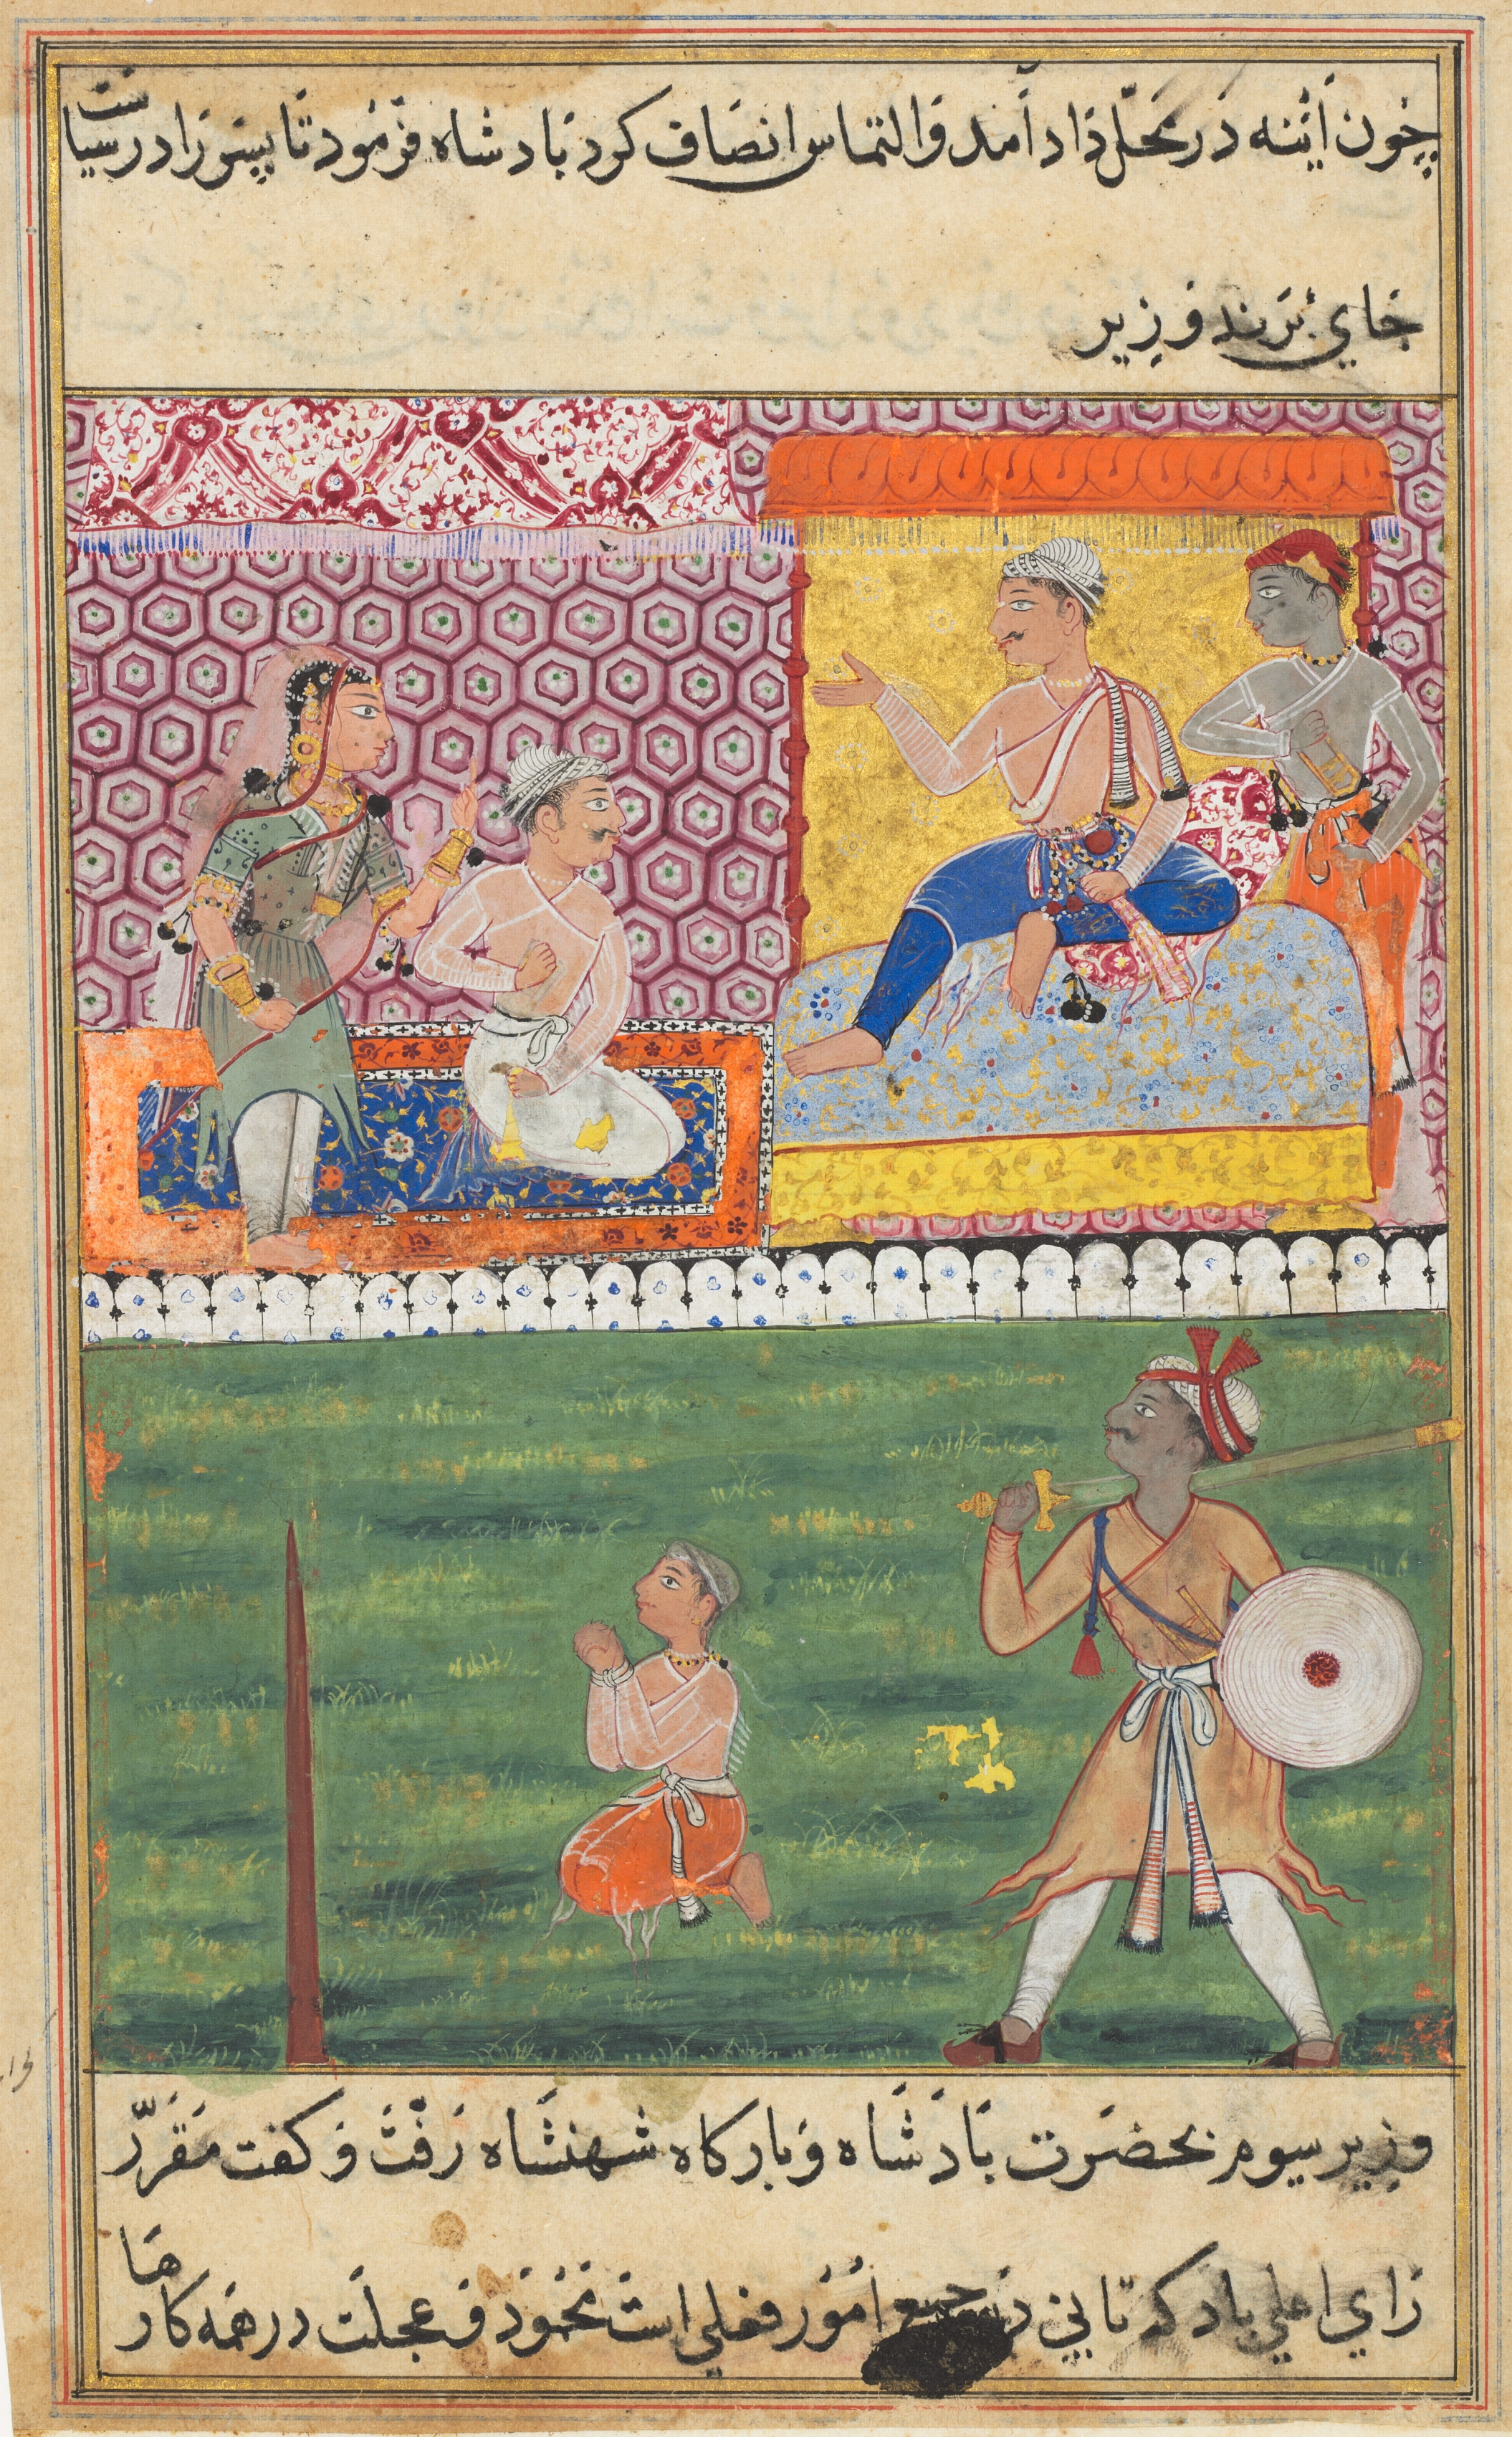 The handmaiden again appeals for justice and the prince is led to the place of execution for the third time, from a Tuti-nama (Tales of a Parrot): Eighth Night